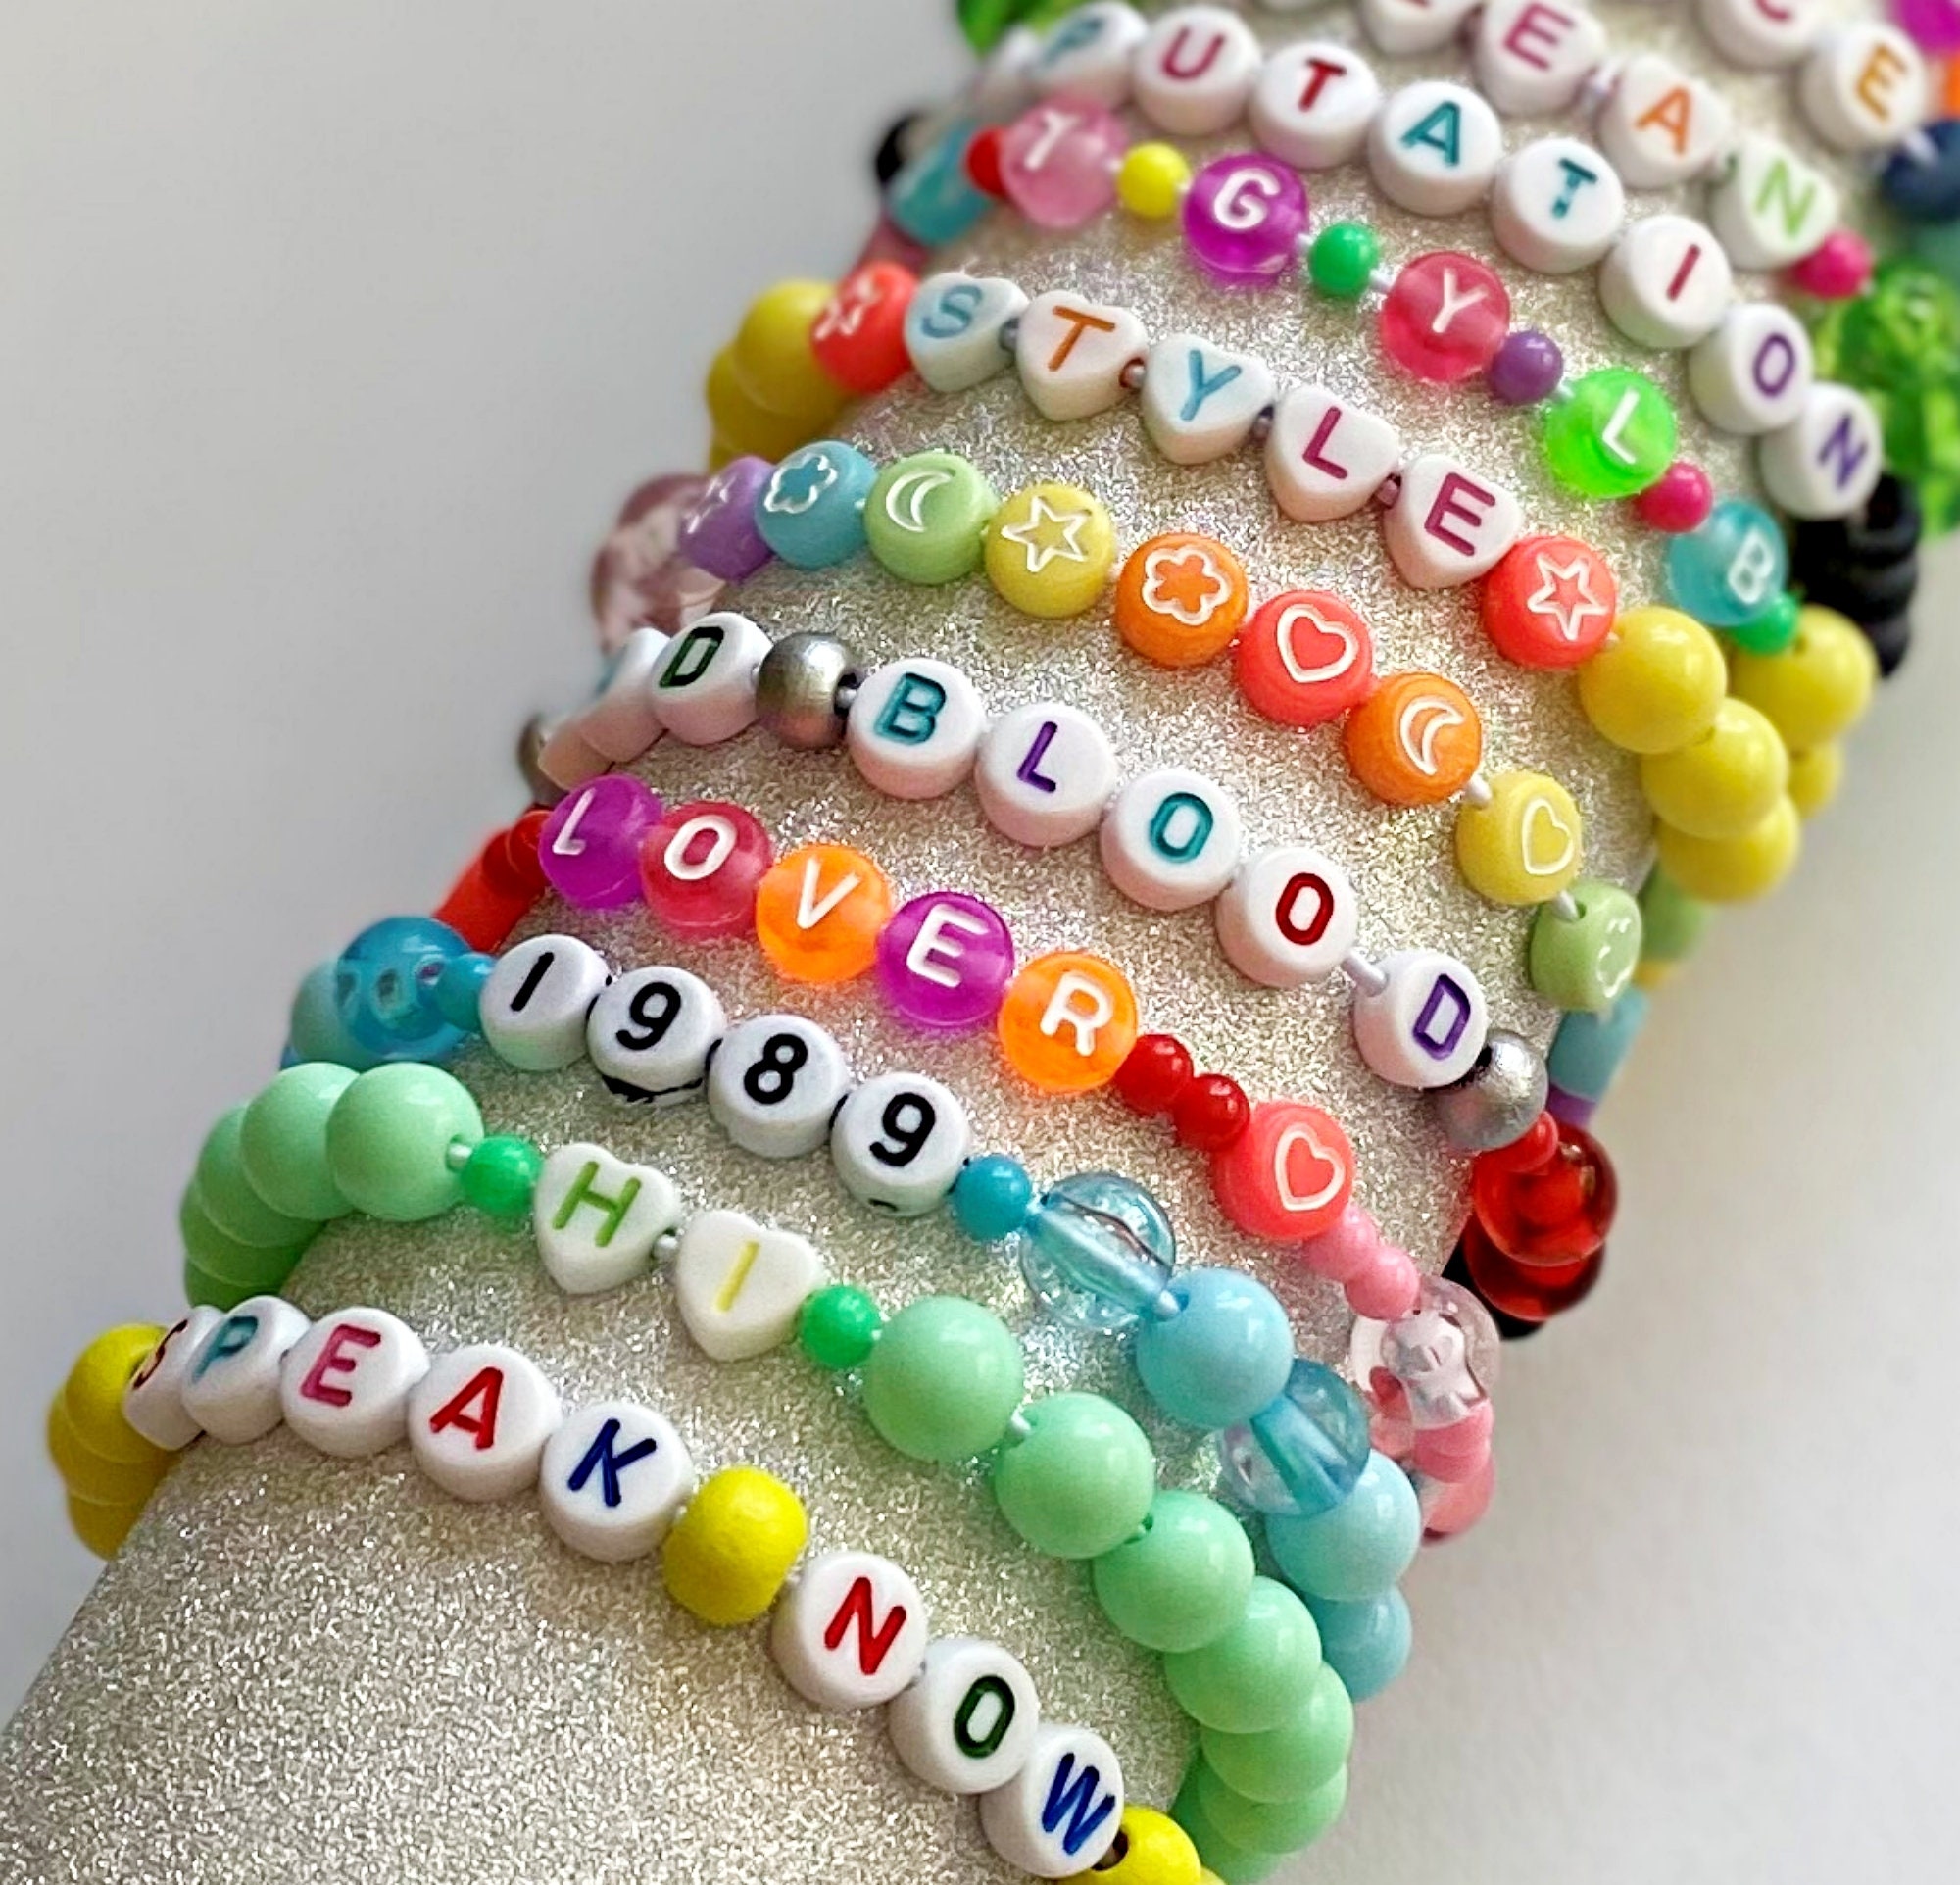 Taylor Swift's beaded bracelets are putting plastic beads back in